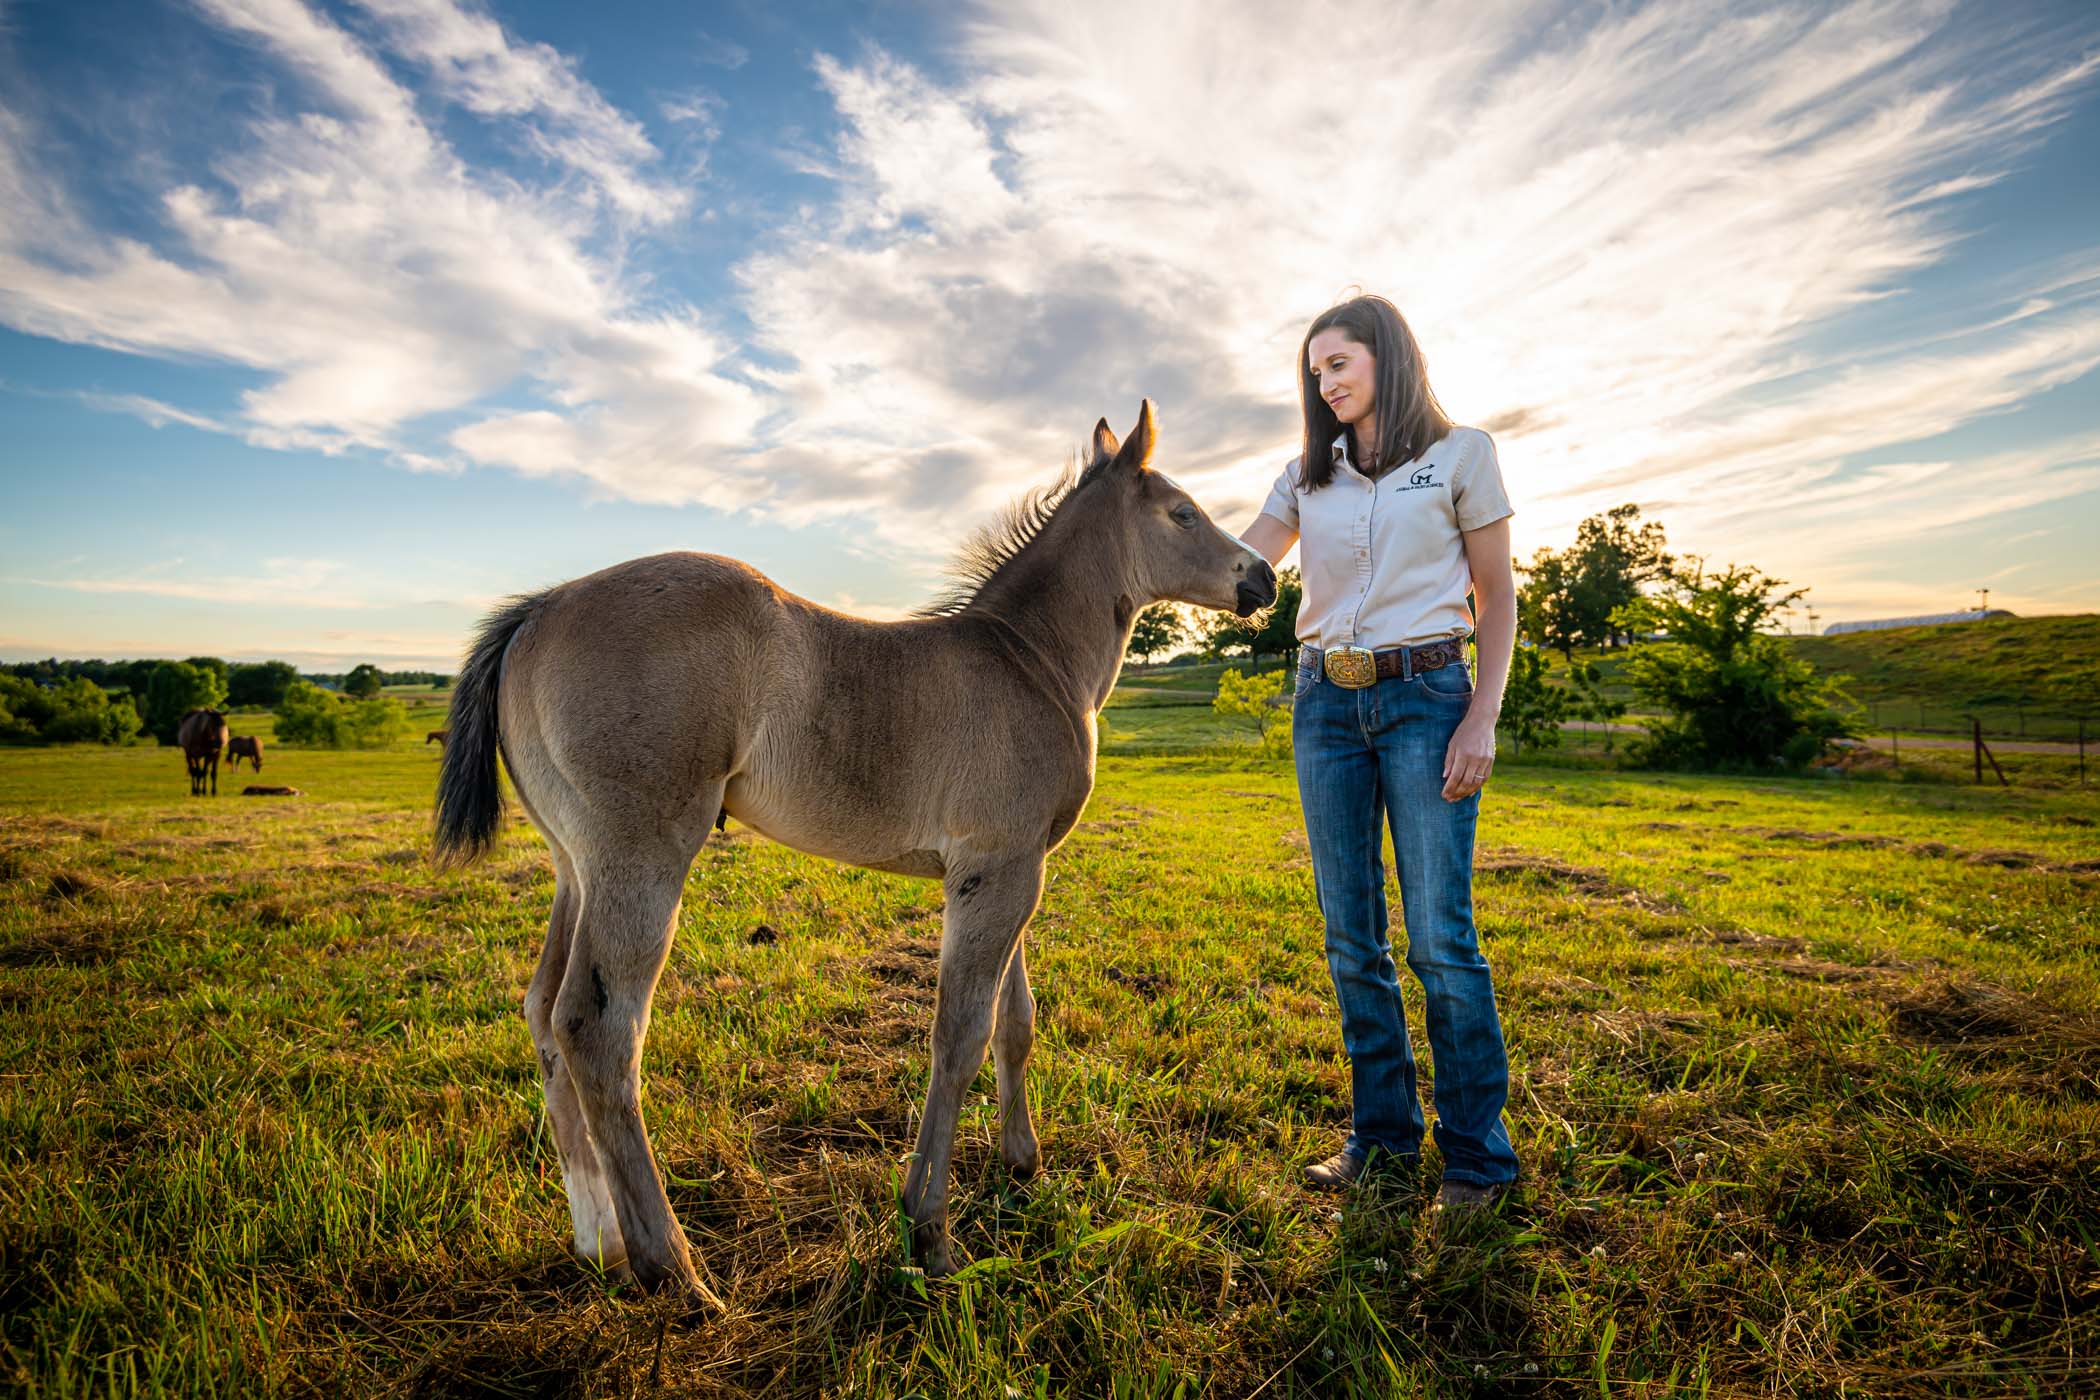 Ashley Glenn pictured with a horse